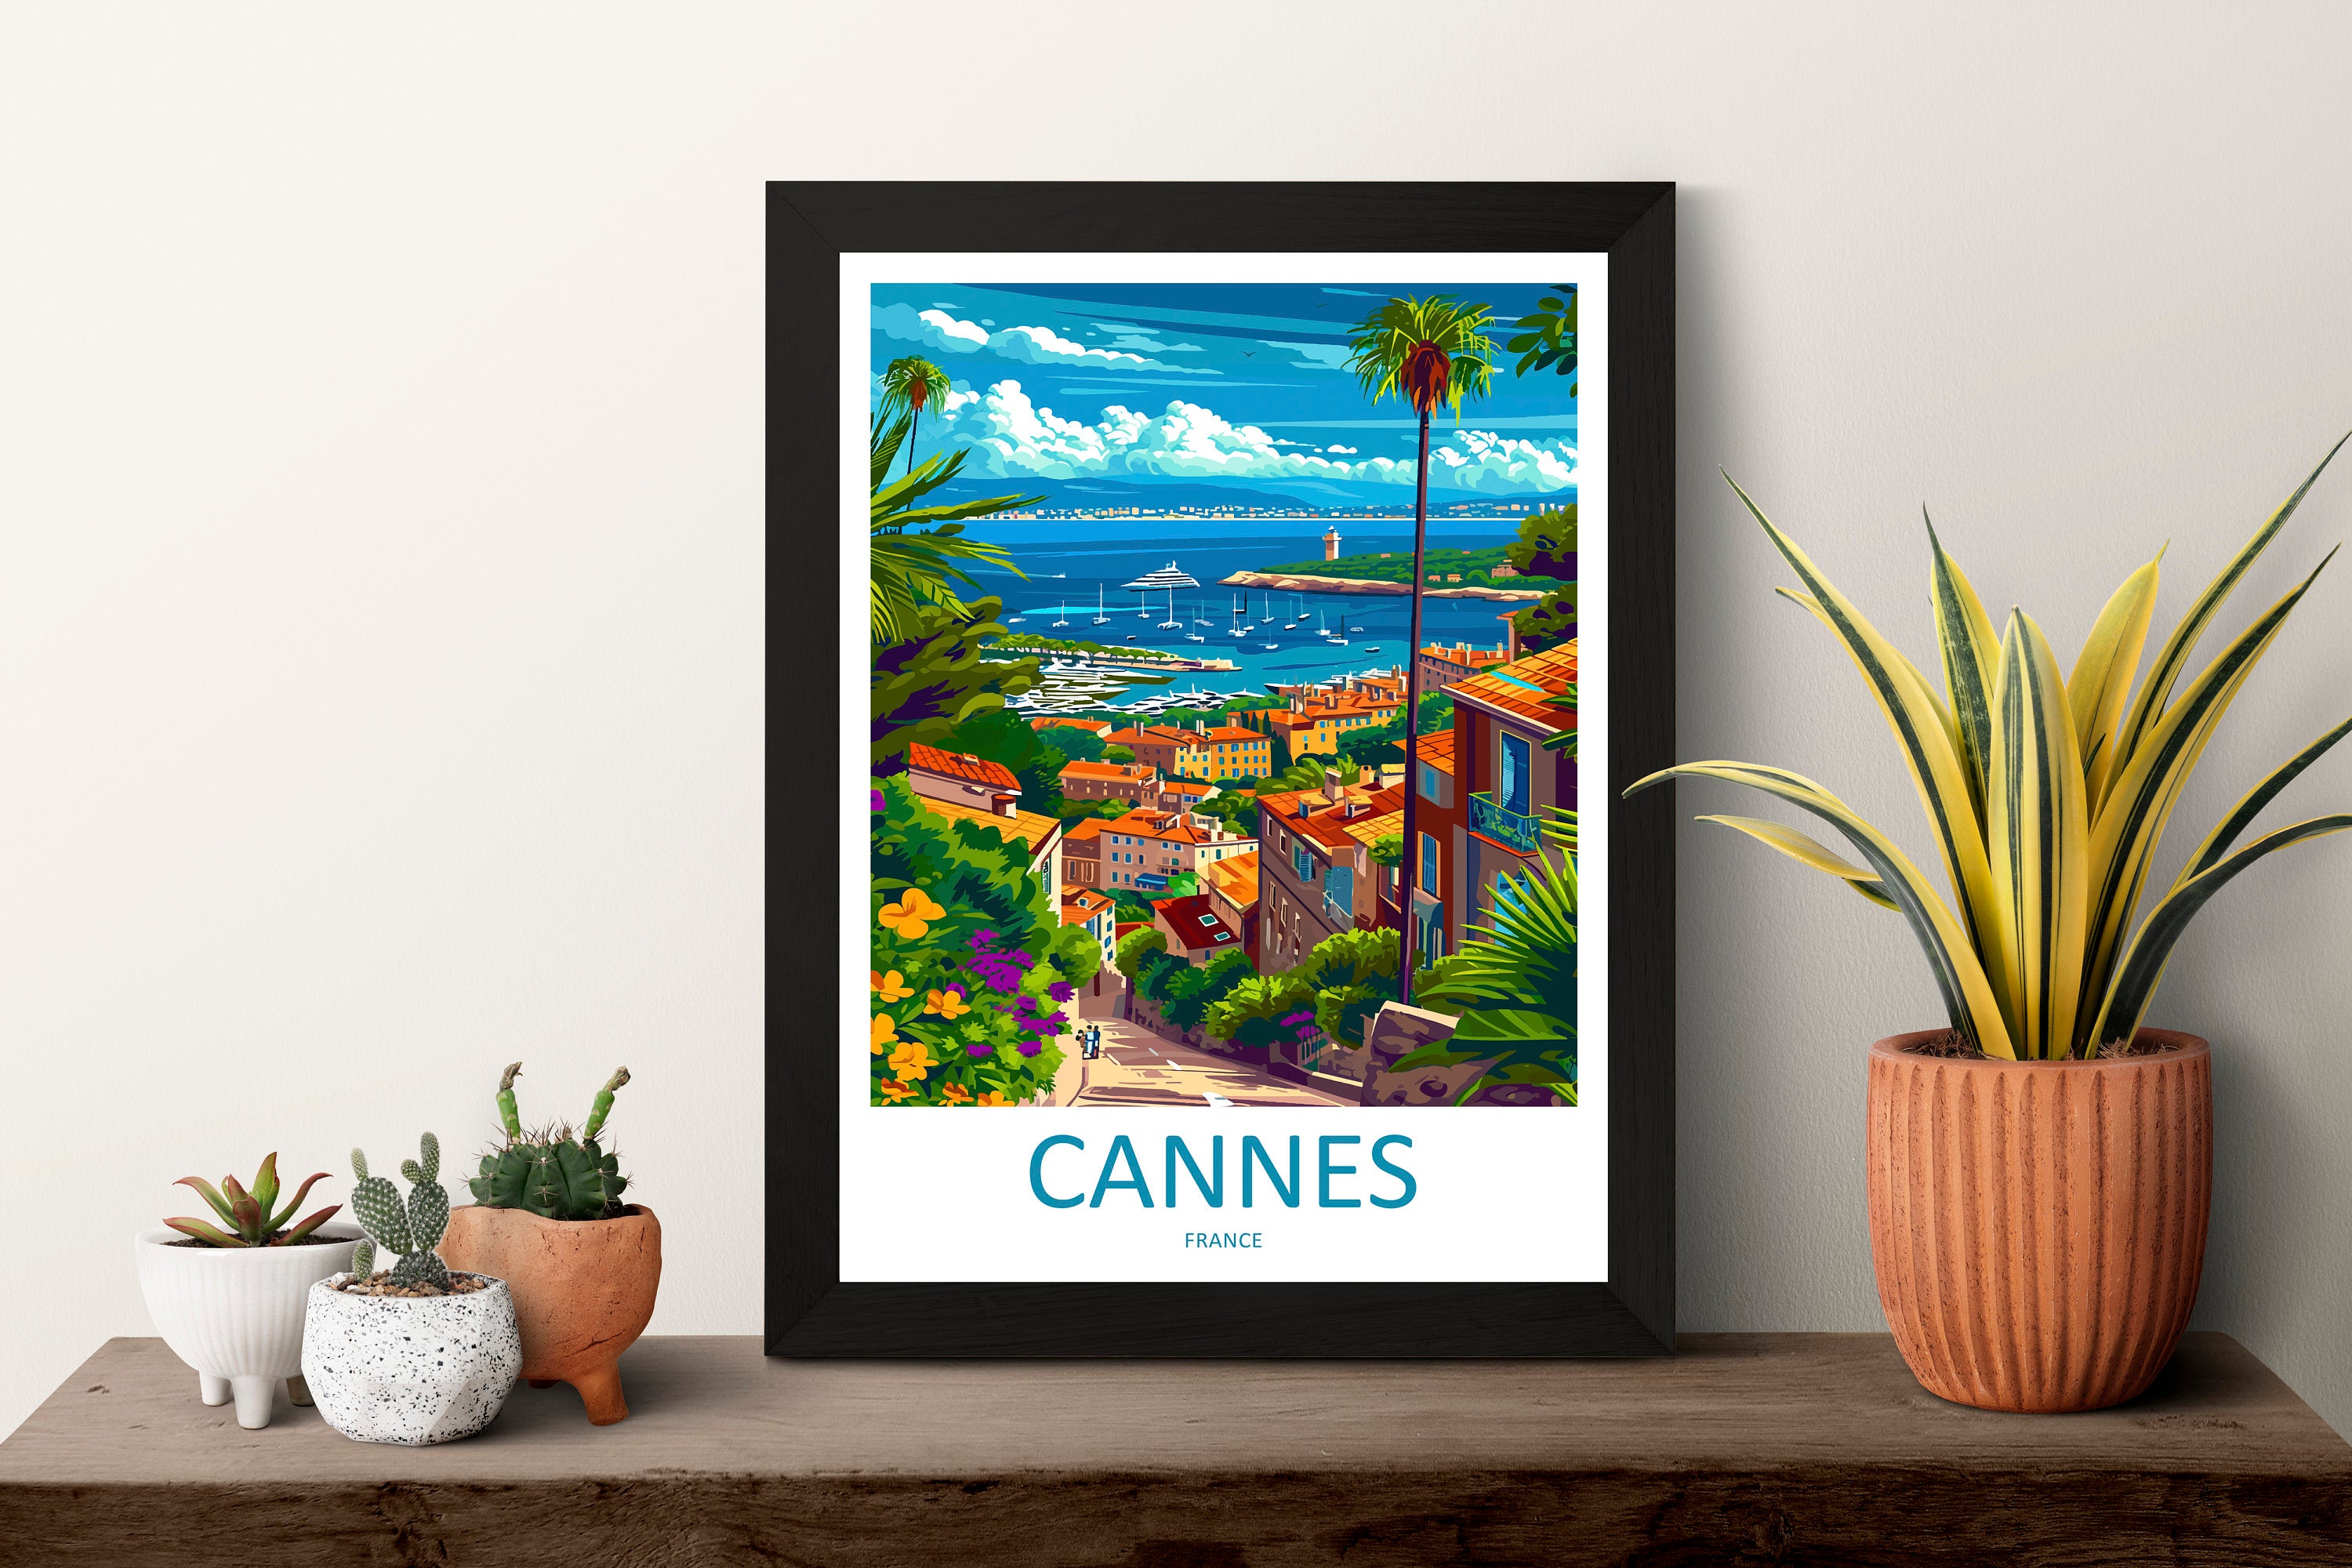 Cannes Travel Print Wall Art Cannes Wall Hanging Home Décor Cannes Gift Art Lovers France Art Lover Gift Cannes Print France Artwork